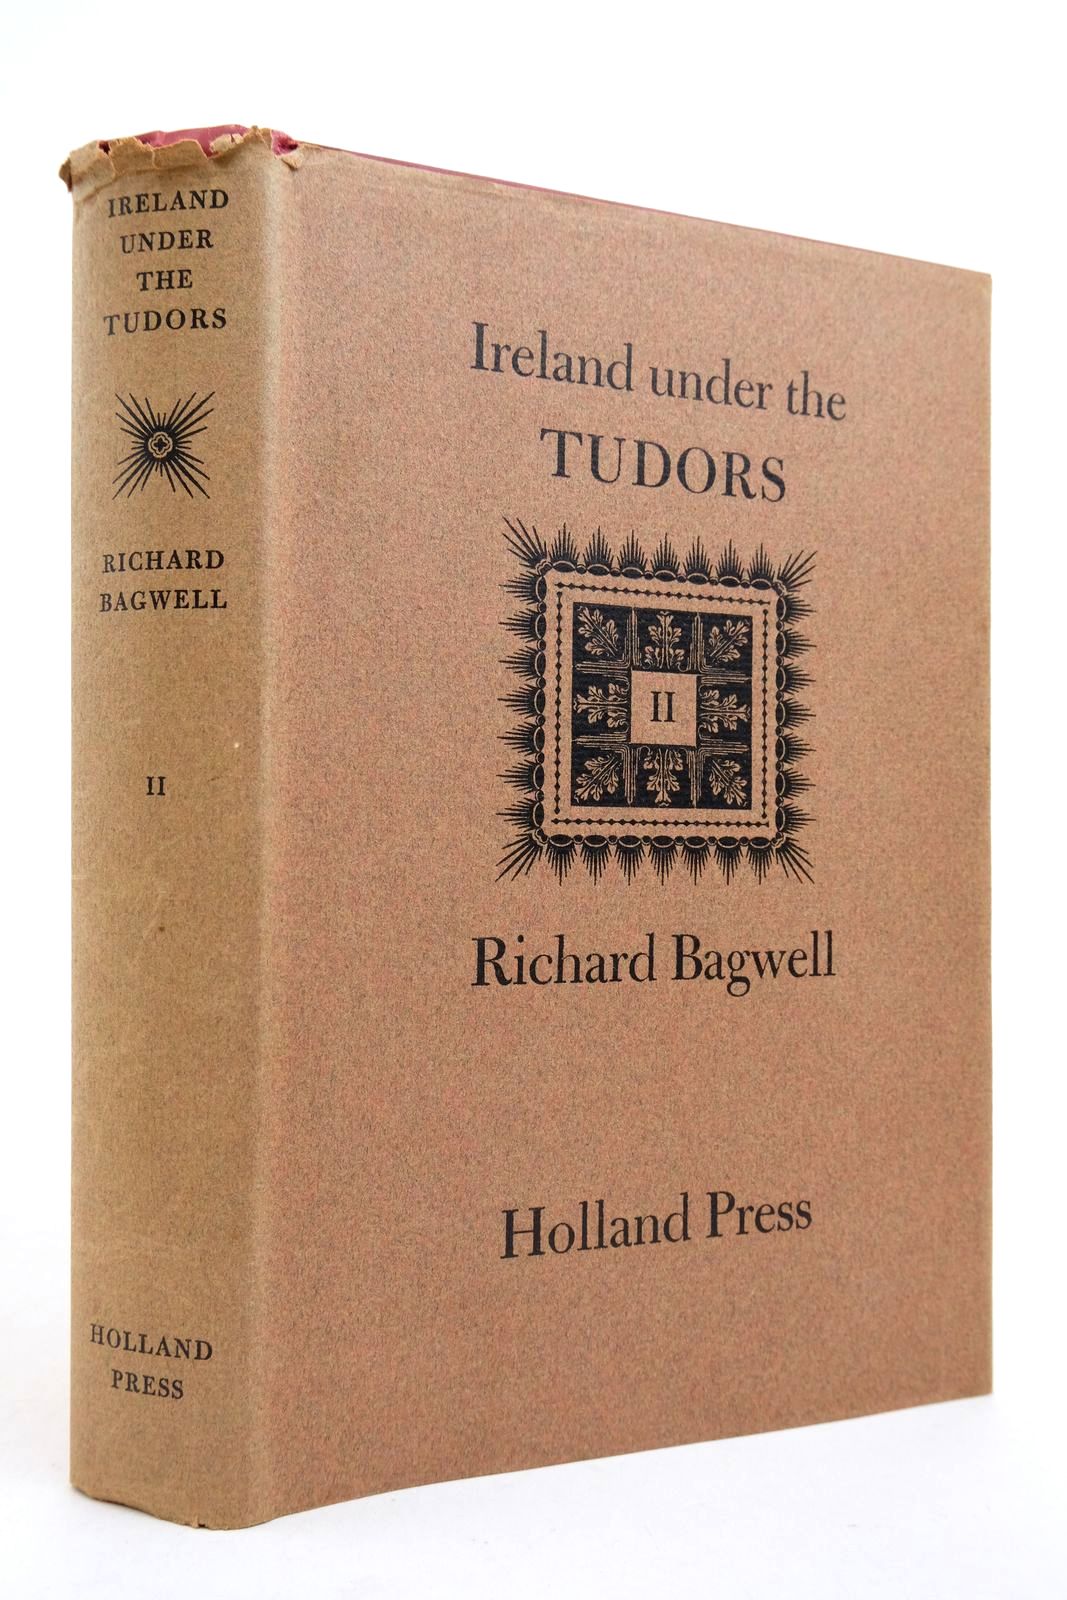 Photo of IRELAND UNDER THE TUDORS WITH A SUCCINCT ACCOUNT OF THE EARLIER HISTORY: VOLUME II written by Bagwell, Richard published by The Holland Press (STOCK CODE: 2140619)  for sale by Stella & Rose's Books